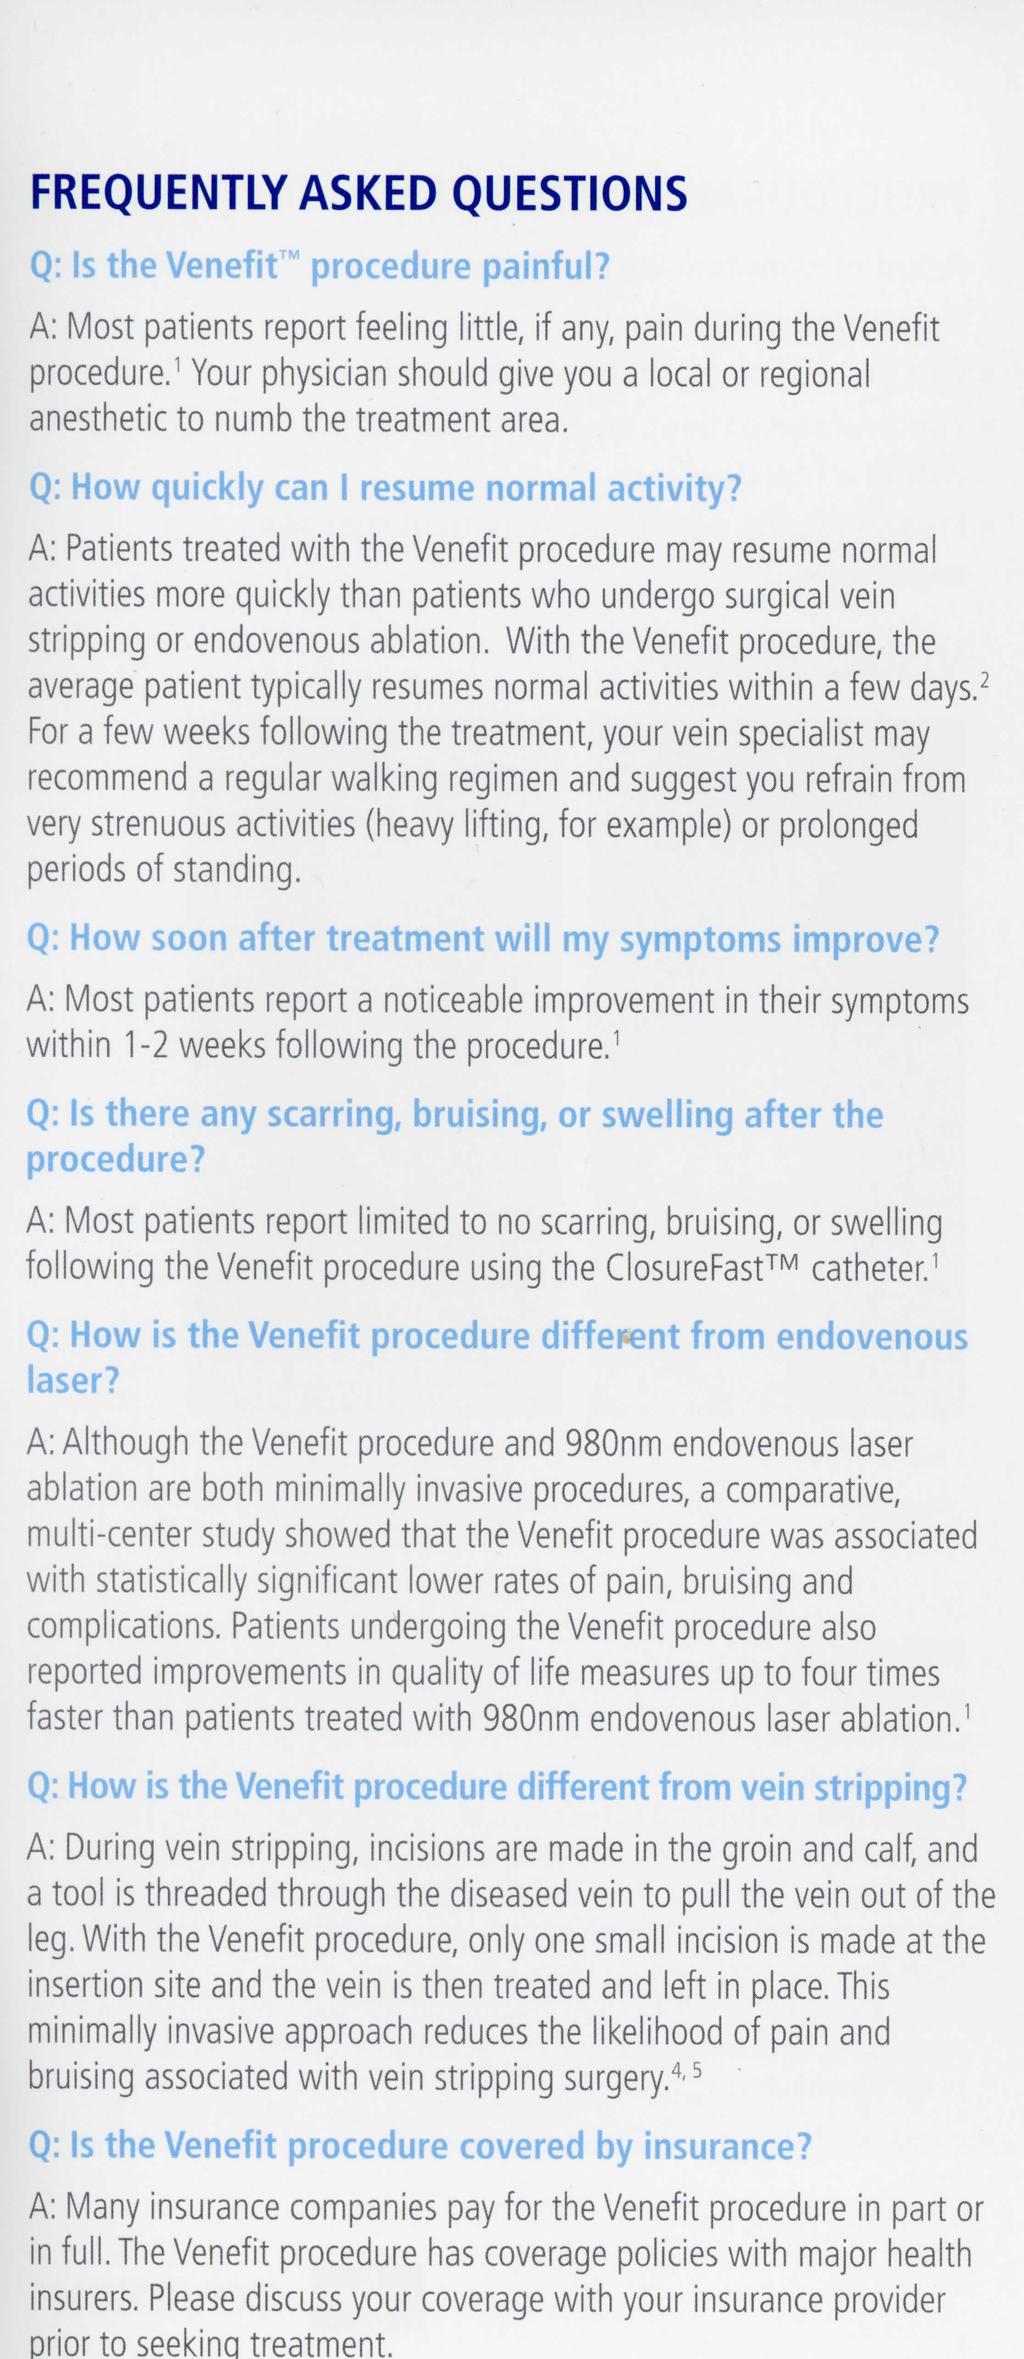 FREQUENTLY ASKED QUESTIONS Q: Is the Venefit procedure painful? A: Most patients report feeling little, if any, pain during the Venefit procedure.